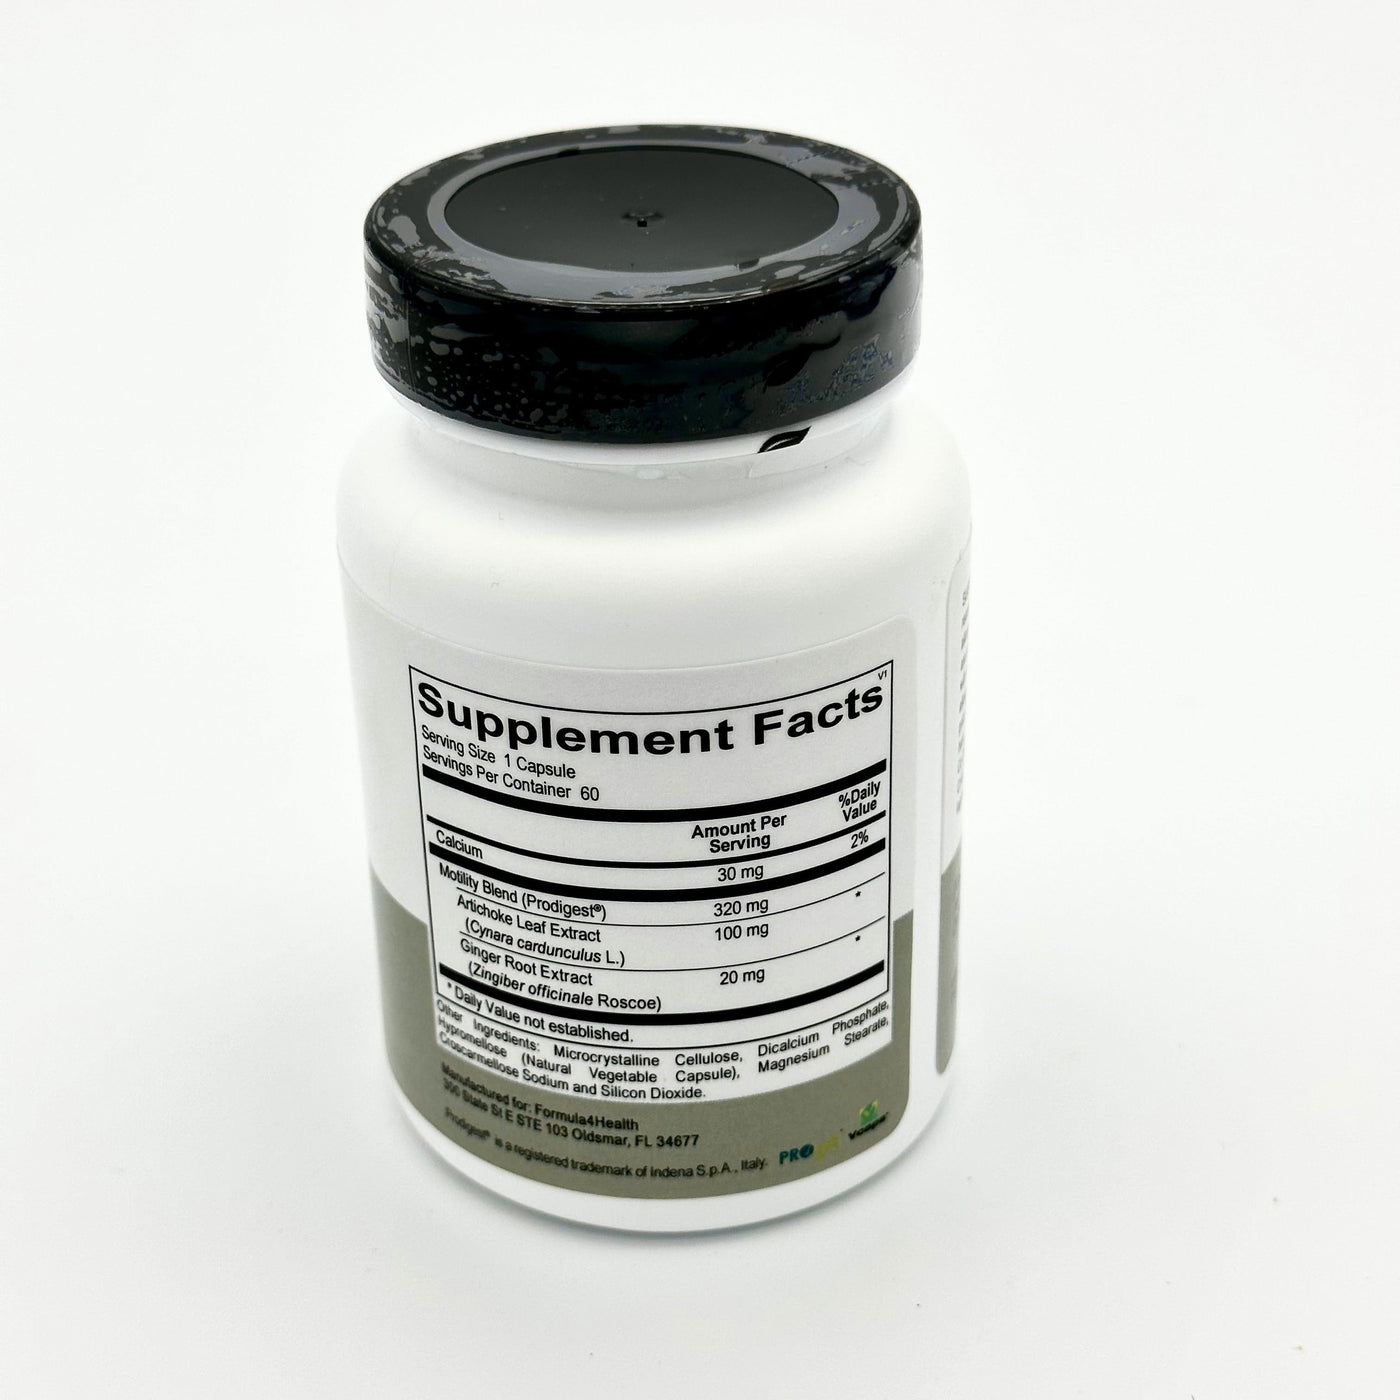 GI Motility Support by  Formula 4 Health. Available for online purchase at  Formula For Health.